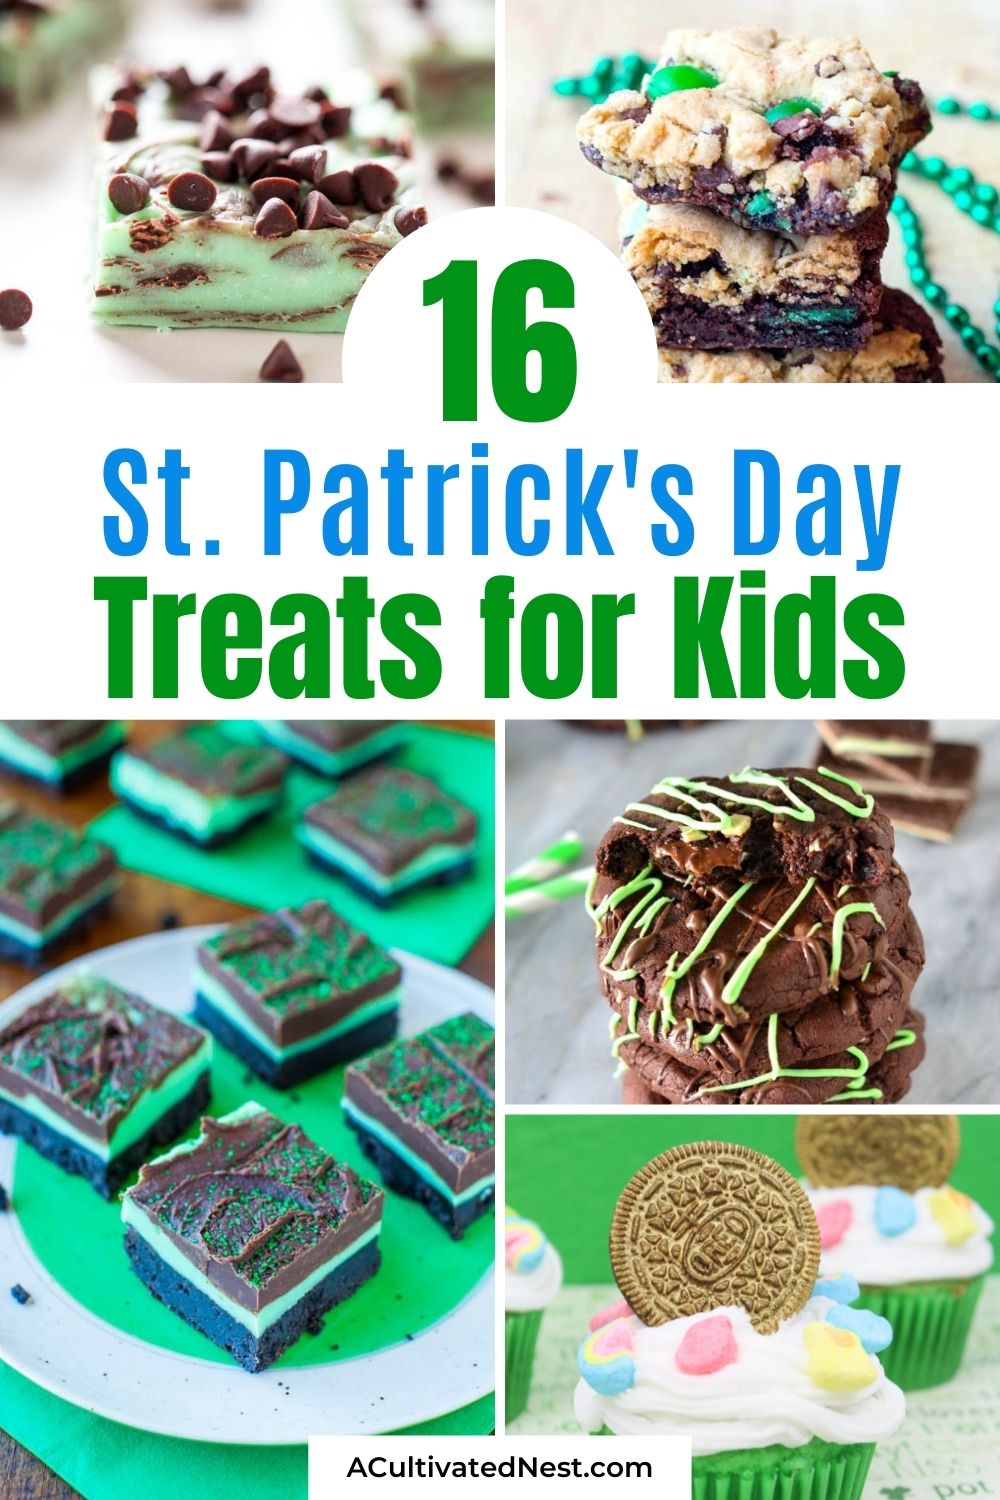 16 Delicious St. Patrick's Day Treats for Kids- Your kids can have some fun treats this St. Patrick's Day, too, with some alcohol-free desserts with fun green coloring! Check out these great St. Patrick's Day recipes for inspiration! | #greenFood #dessertRecipes #StPatricksDay #SaintPatricksDay #greenDesserts #dessertRecipes #ACultivatedNest